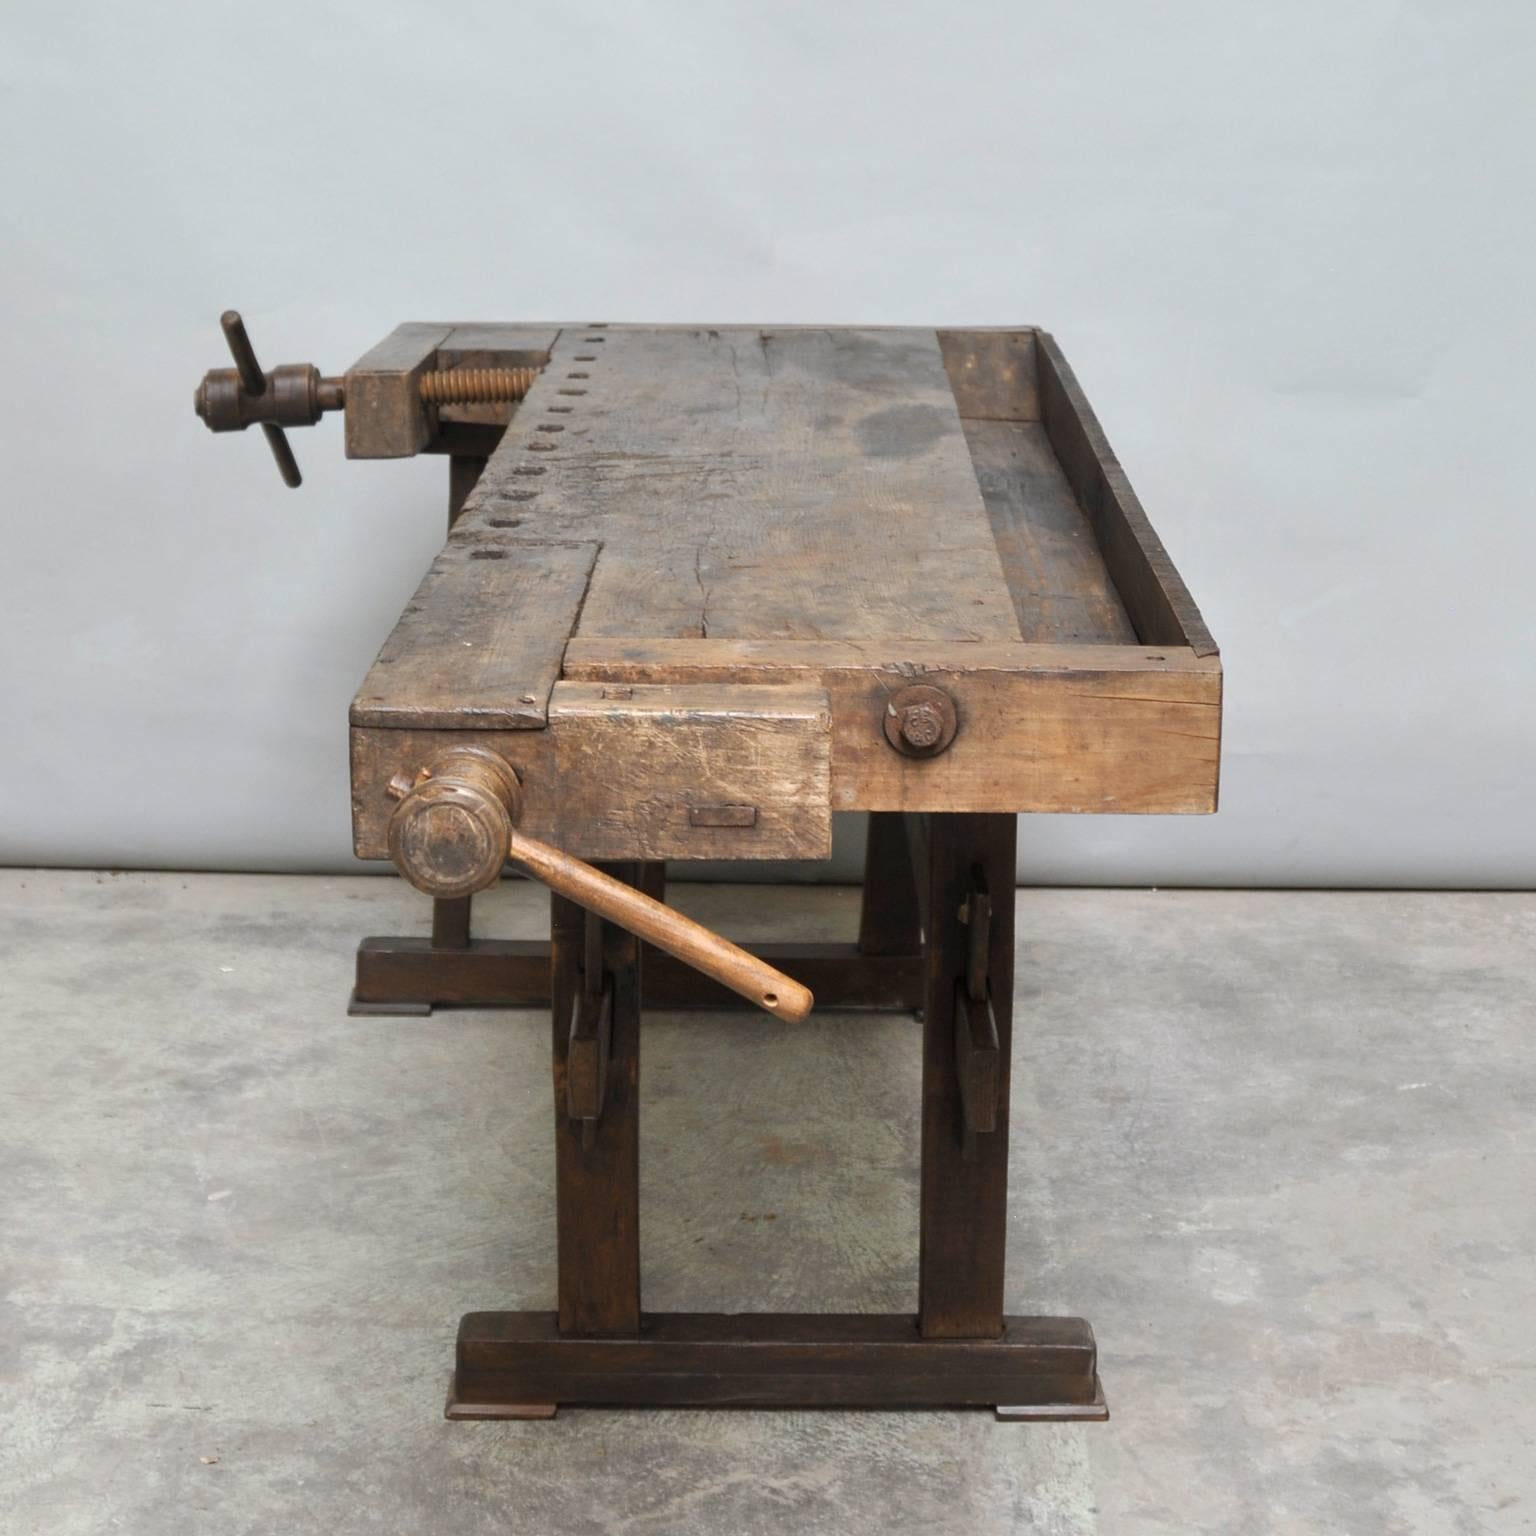 This vintage Hungarian carpenter’s´ workbench features two vices and a recessed tray where the carpenter would lay his tools. It was manufactured, circa 1935.